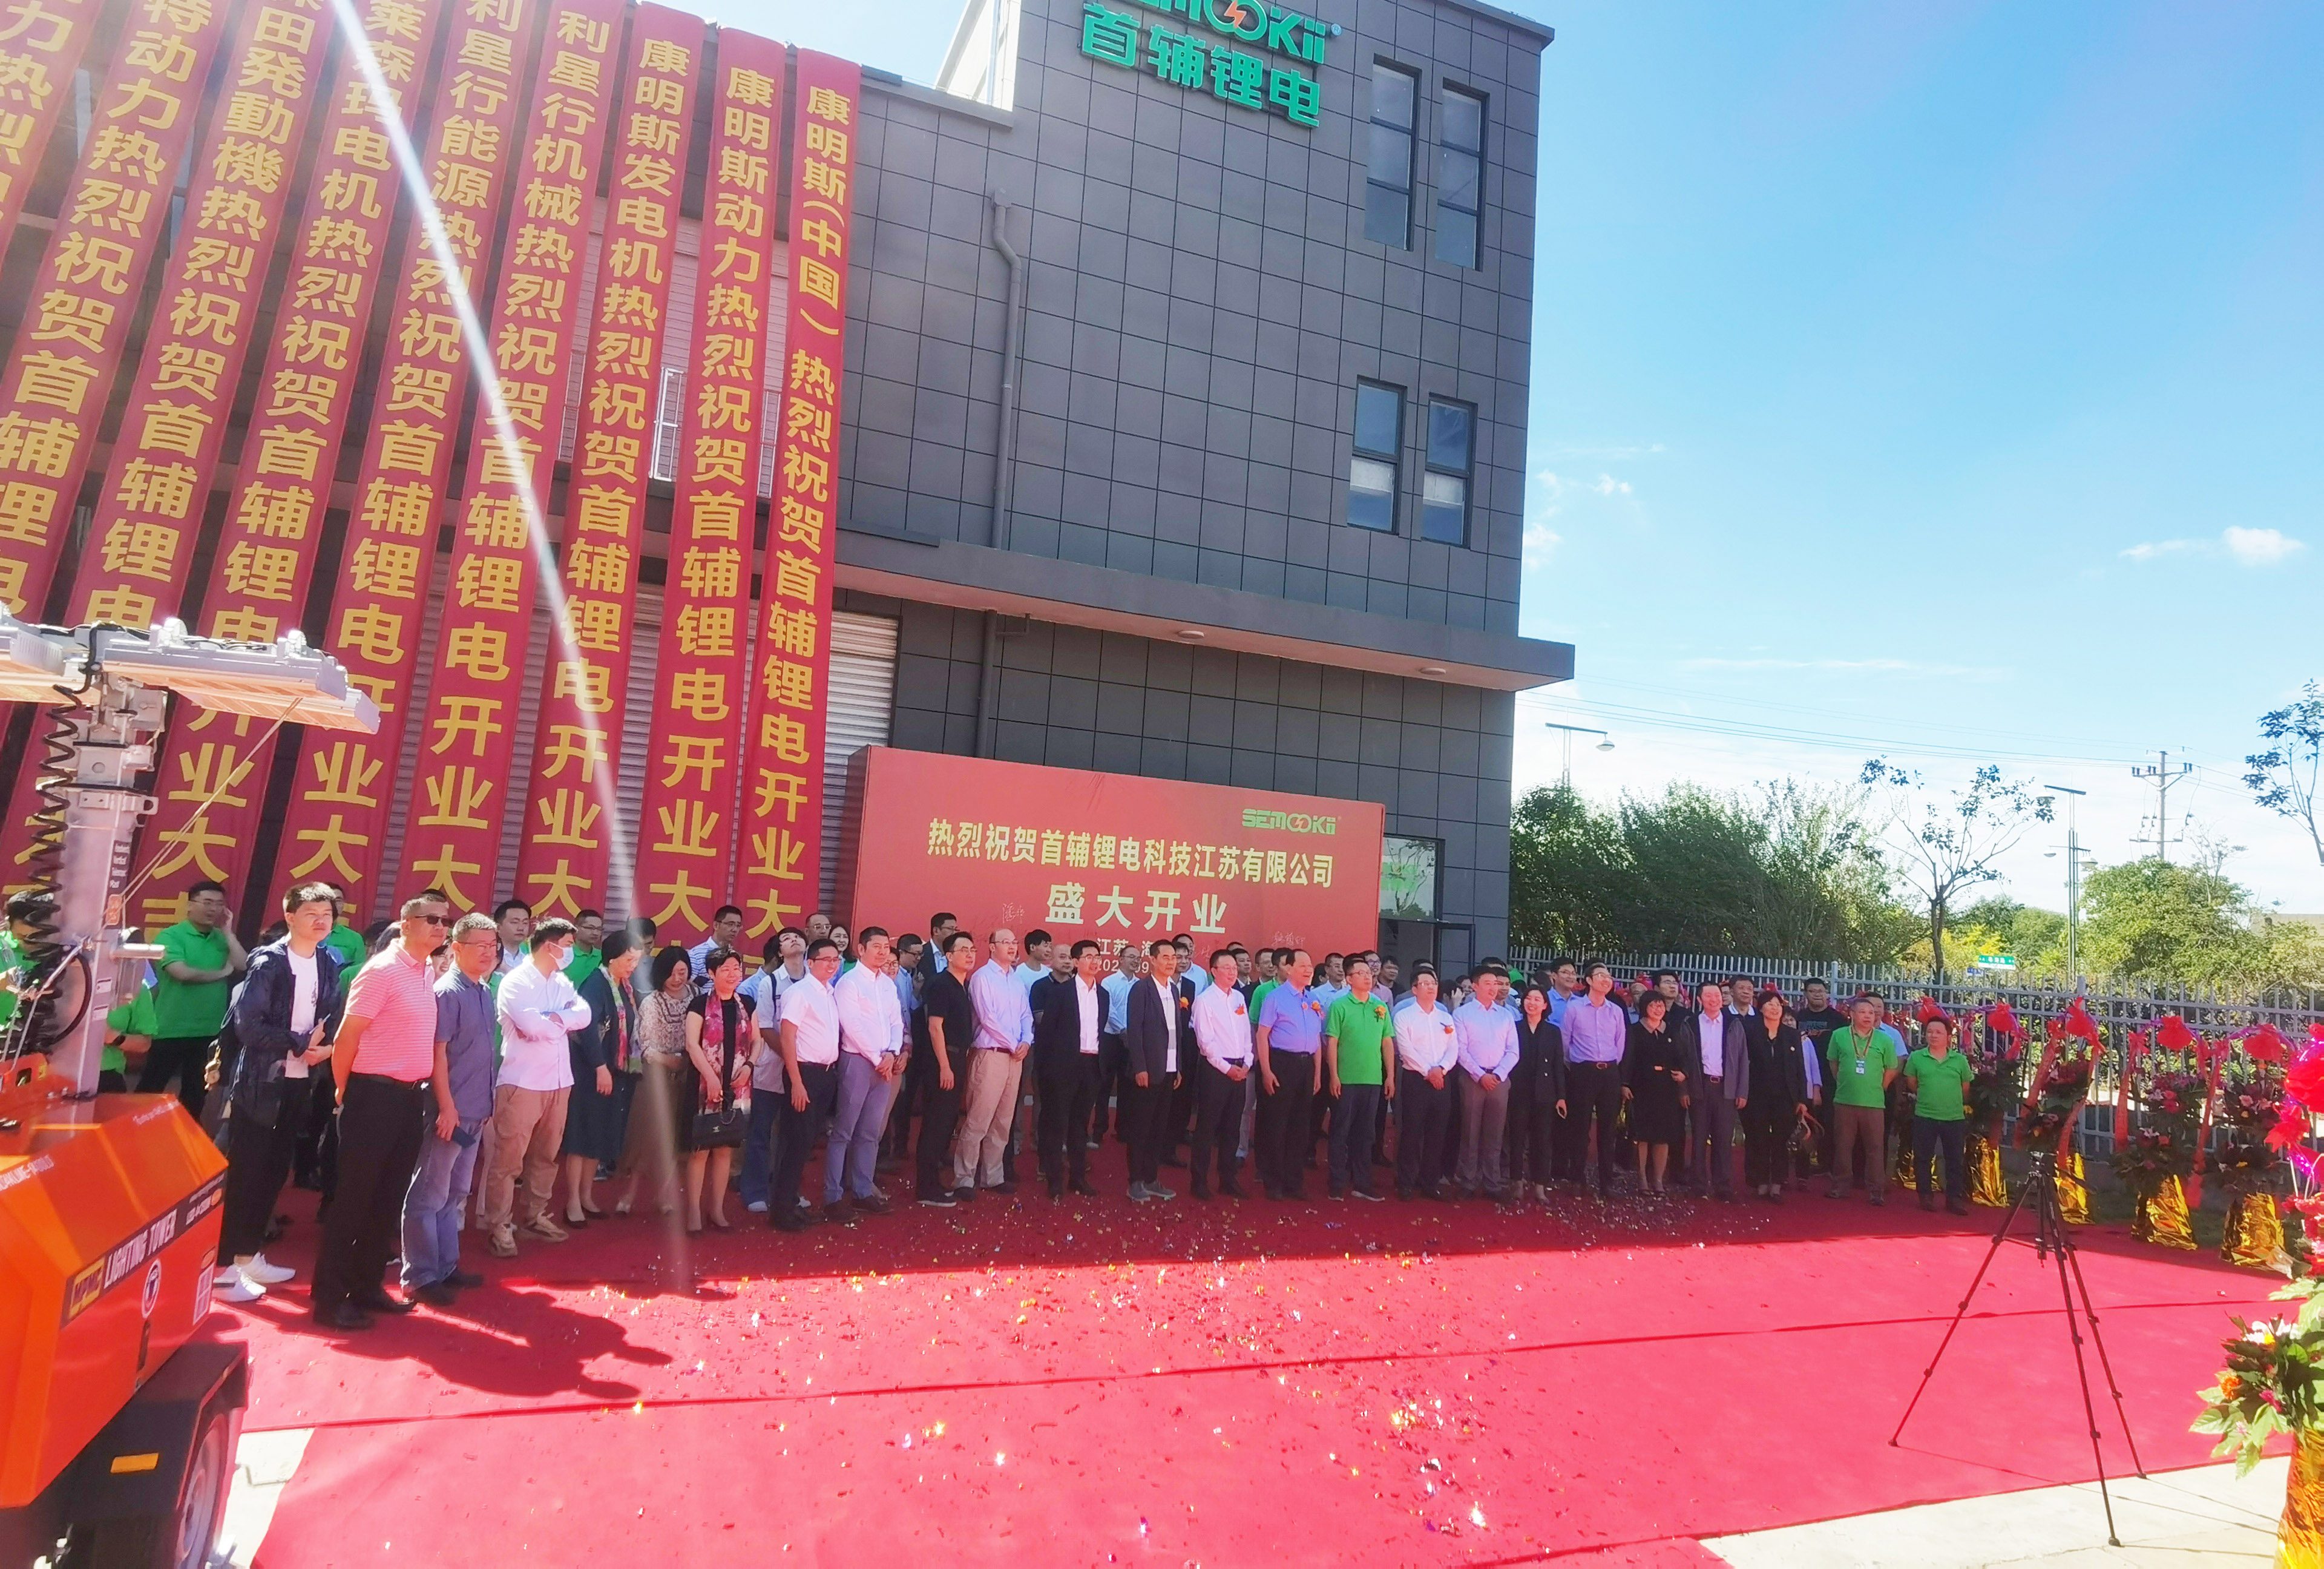 Carbon Reduction and Energy Storage, Create a Smart Future 丨Semookii BESS Co., Ltd. held a Grand Opening Ceremony